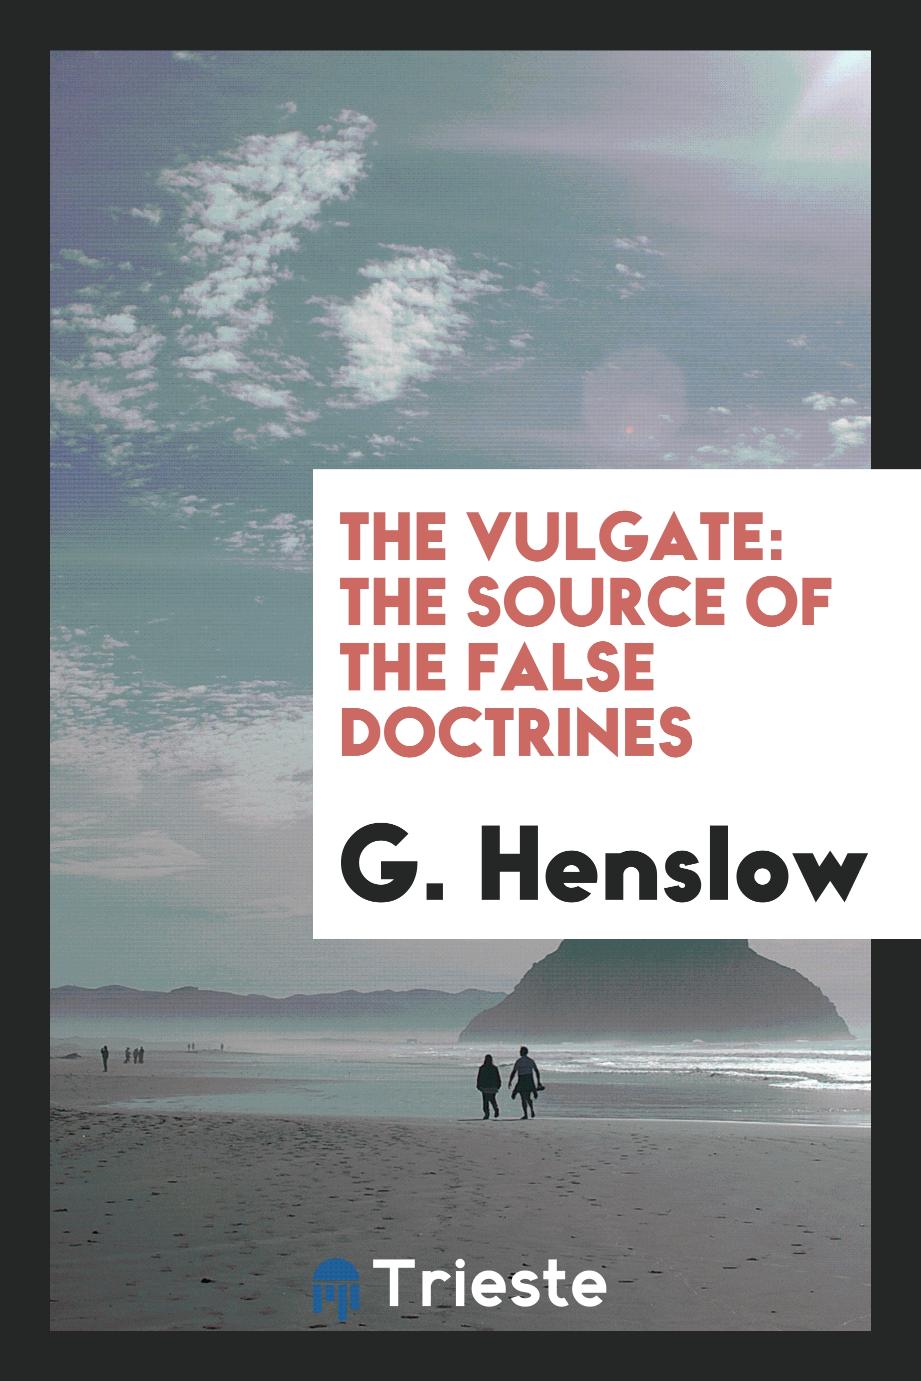 The Vulgate: the source of the false doctrines